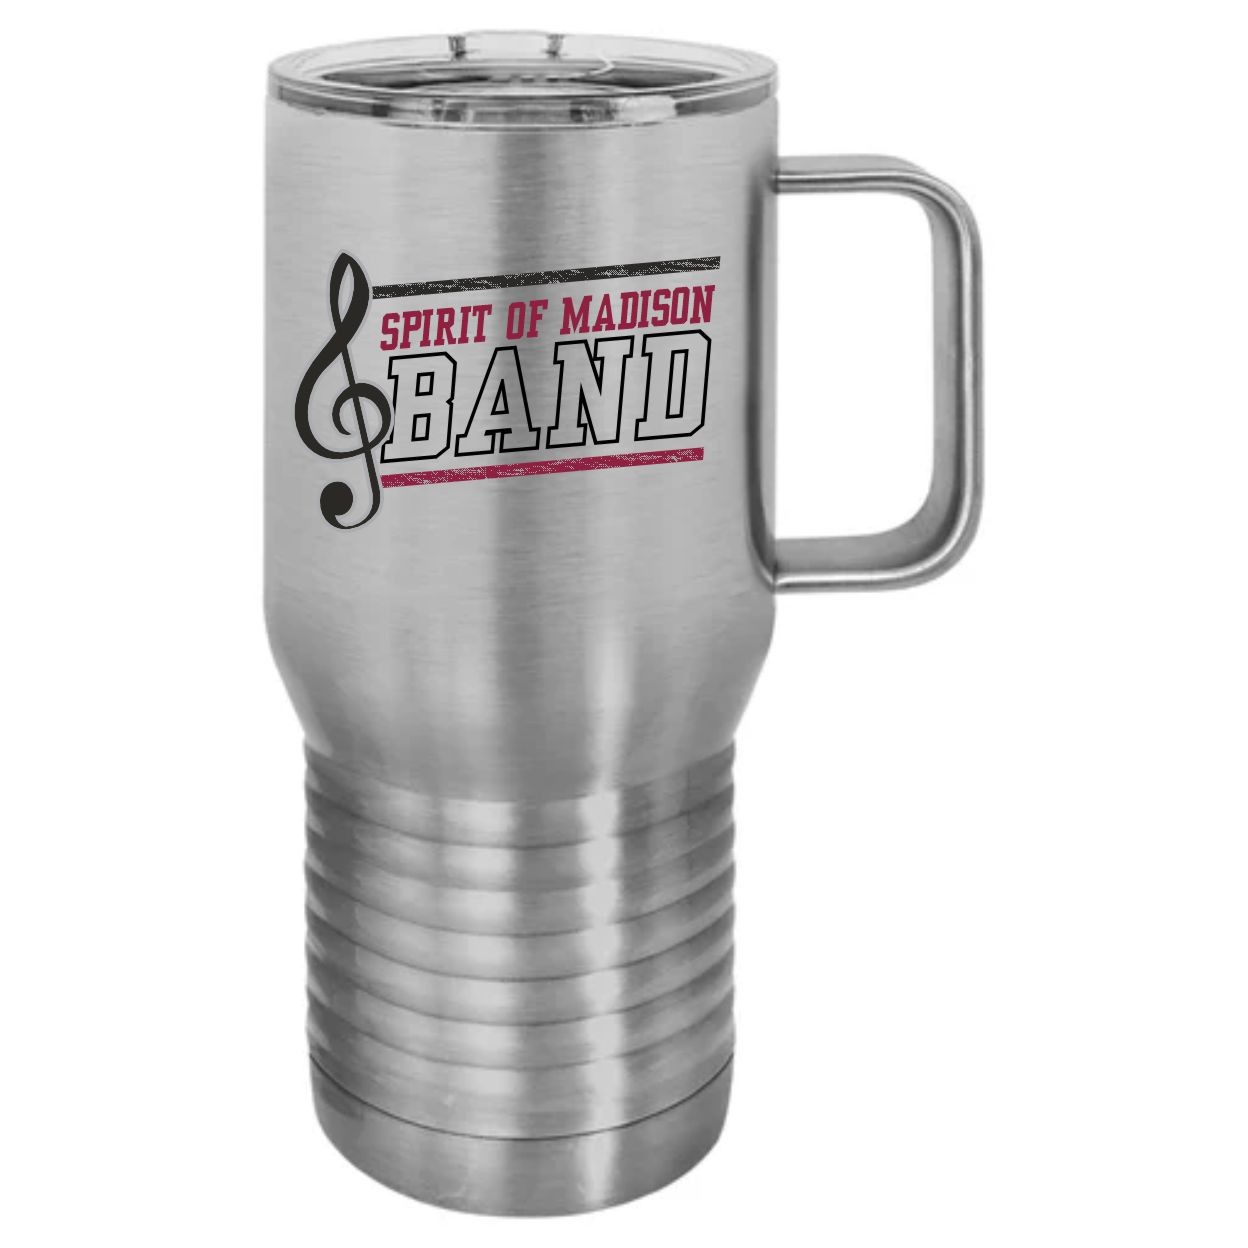 Spirit of Madison 20oz Tumbler with Handle - Stainless Steel